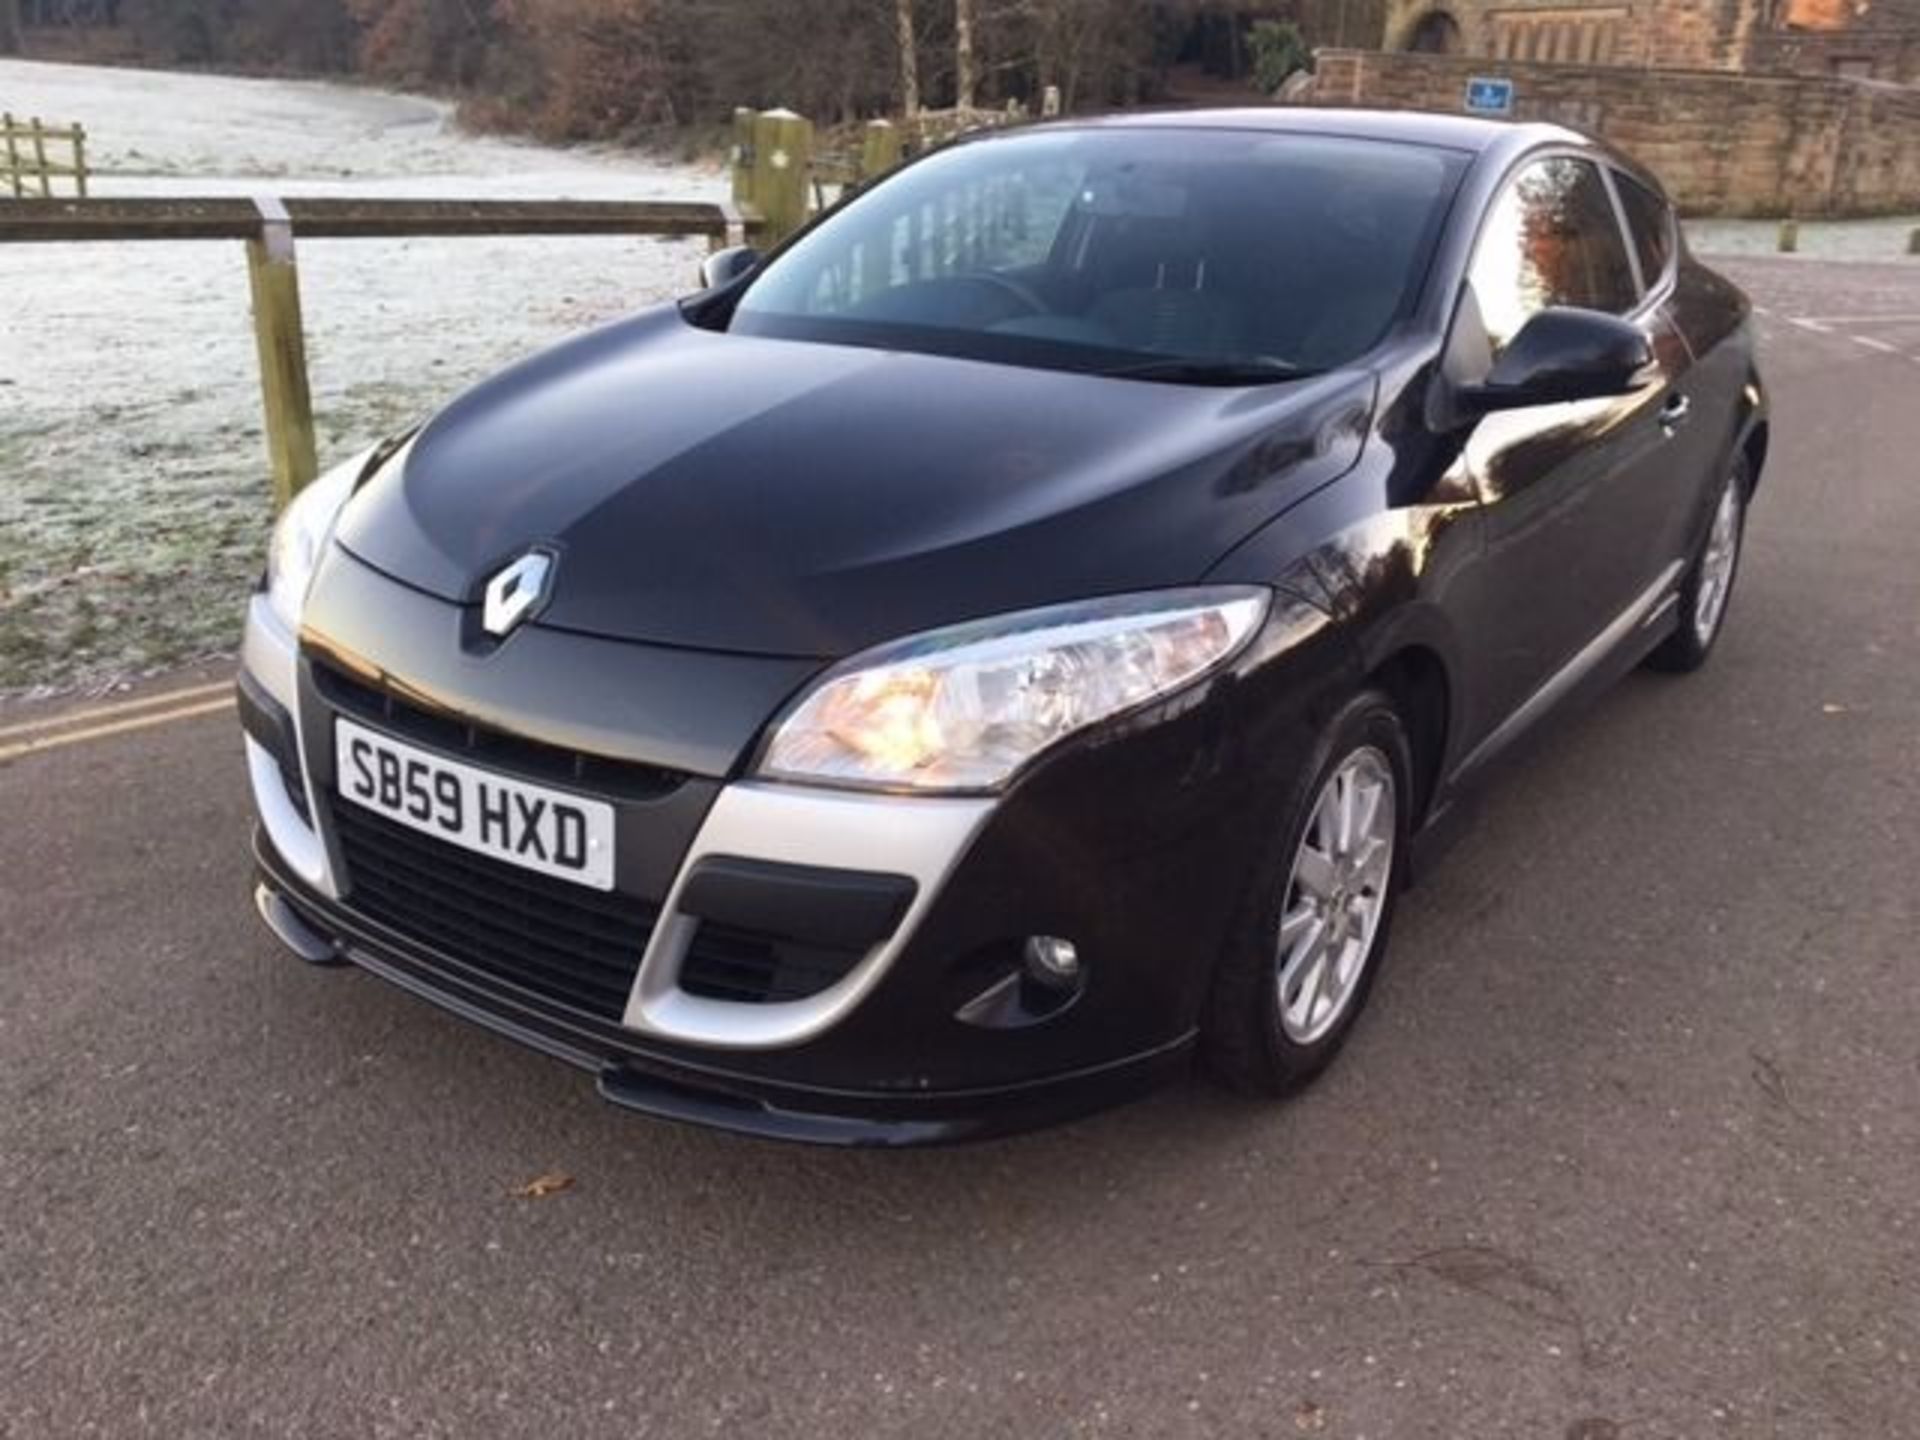 2009 RENAULT MEGANE 1.6 EXPRESSION VVT 110 BHP WITH RS BODY STYLING KIT. 55K MILES 12 MONTHS MOT.